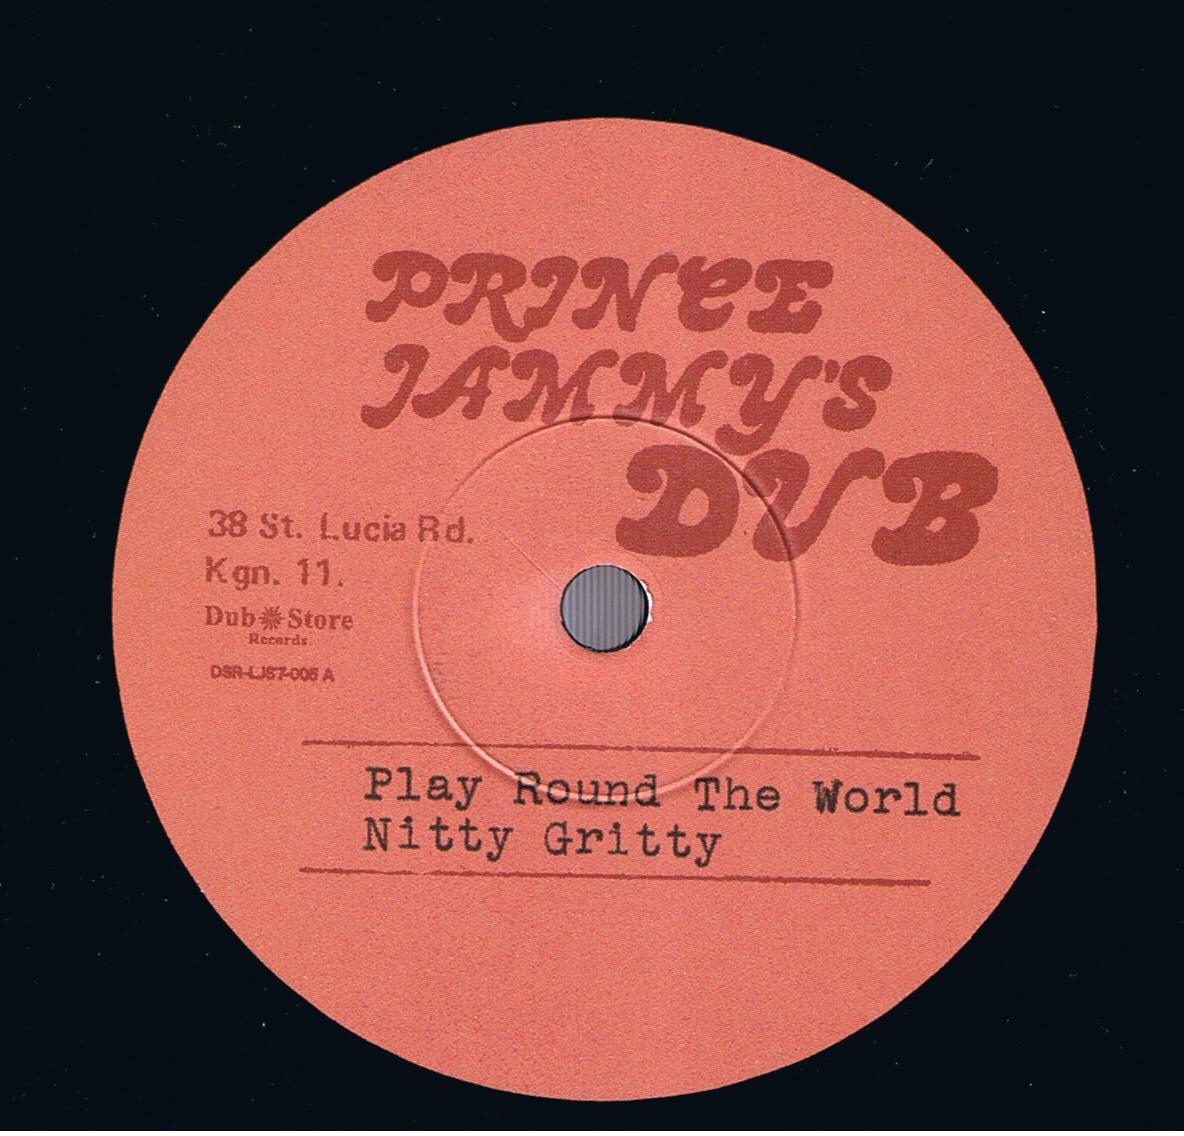 Nitty Gritty - Play Round The World / Nitty Gritty - Kill Them All (7")